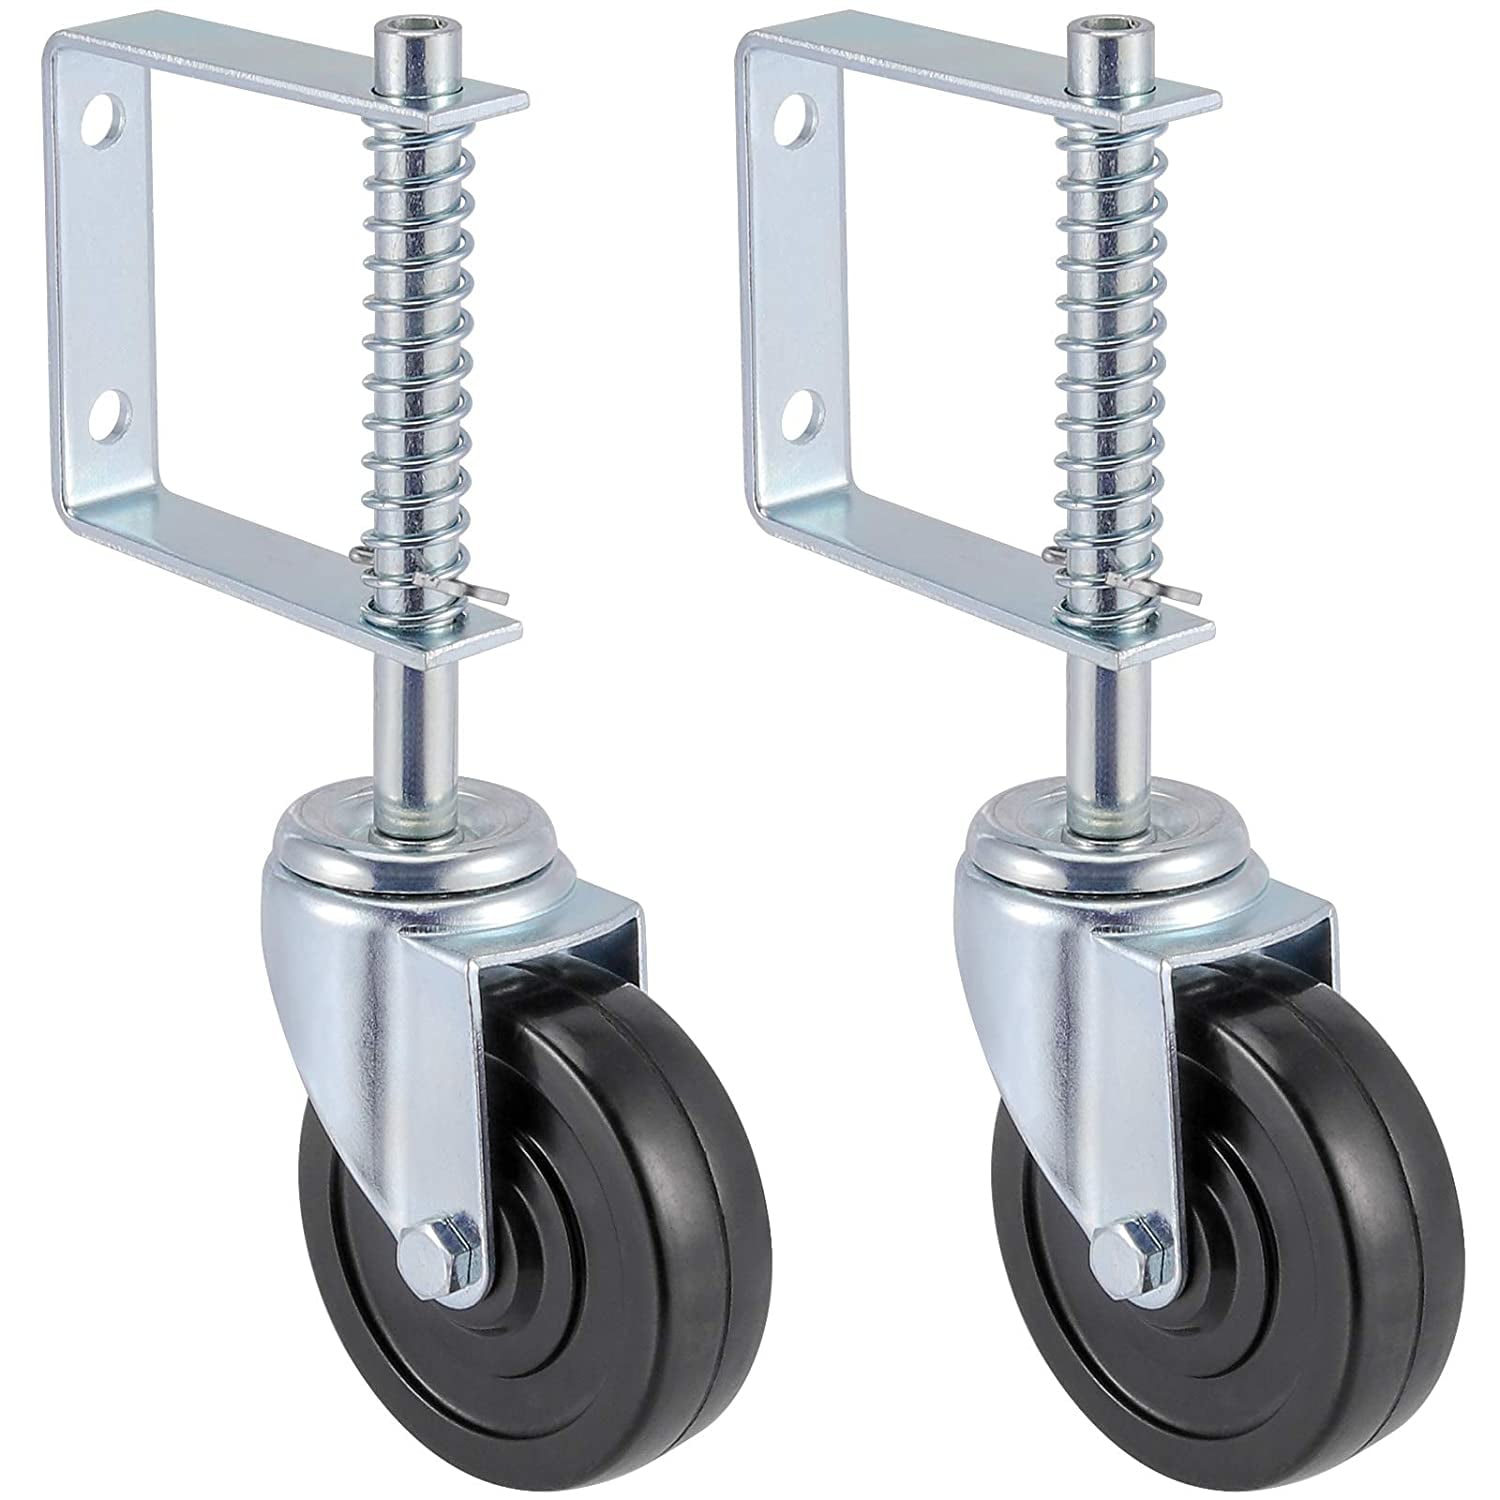 Gate Caster Pneumatic Spring-Loaded Universal Mount 200Lb Load Capacity 8"-Wheel 